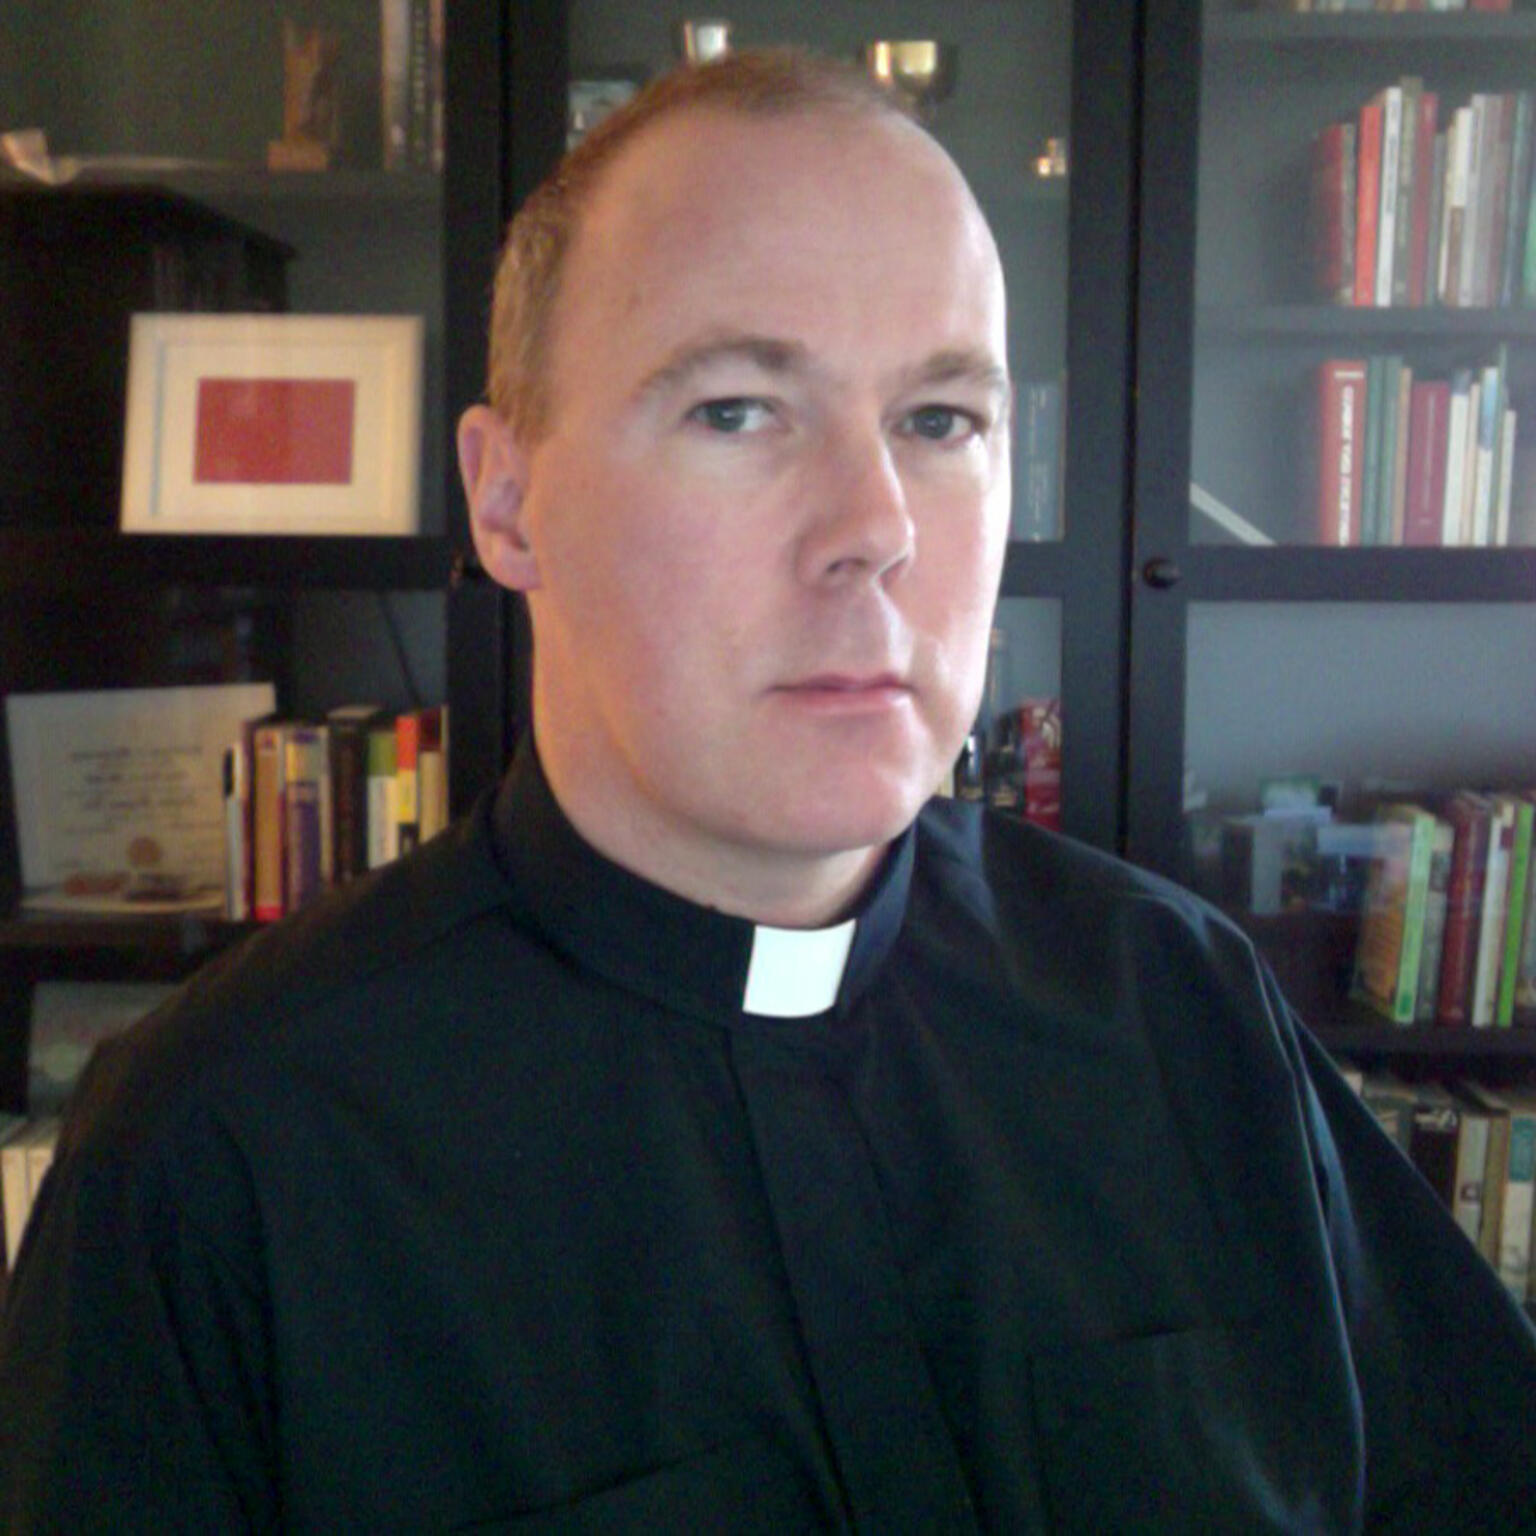 Fr. Cathal Doherty